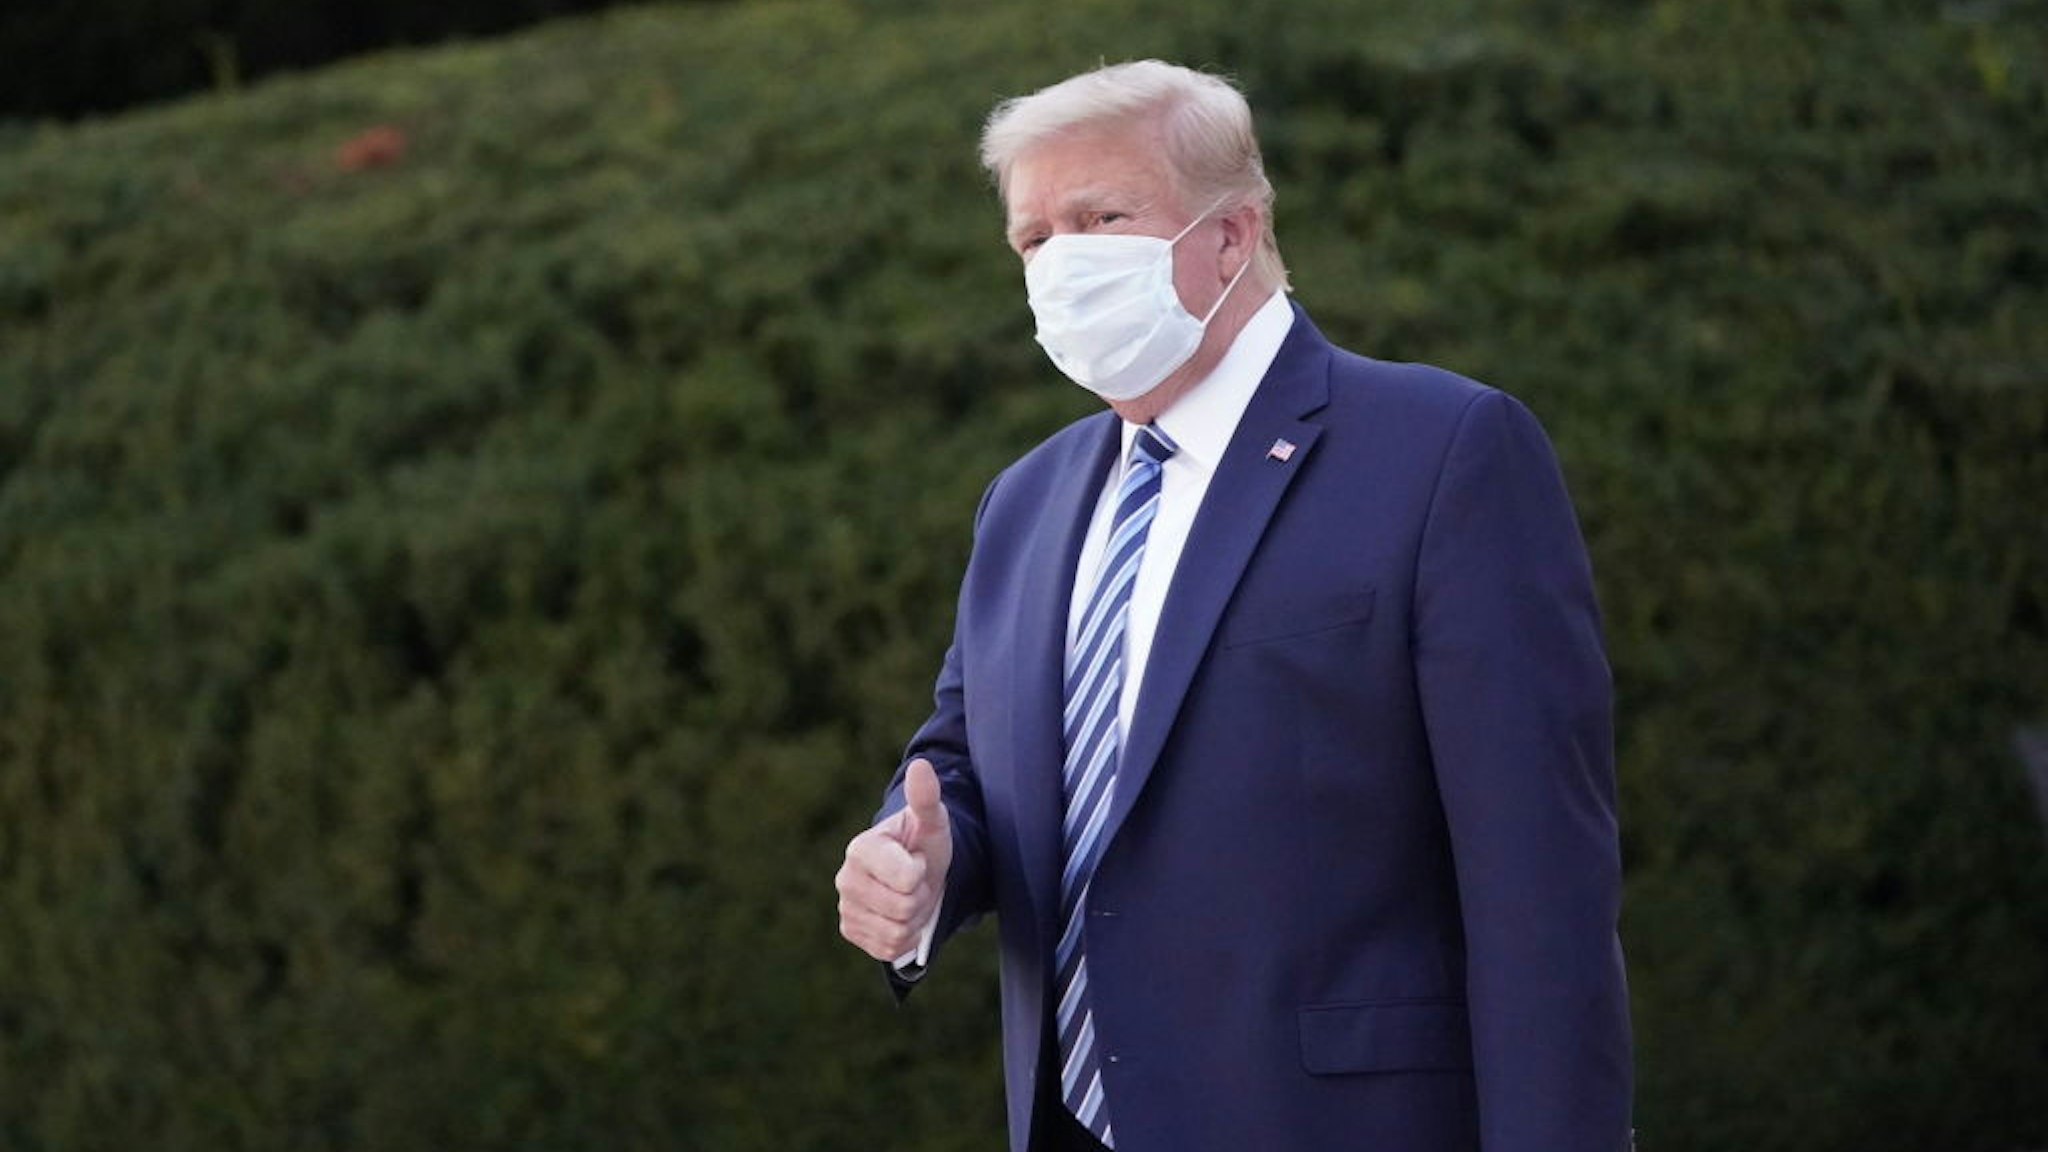 U.S. President Donald Trump gestures outside of Walter Reed National Military Medical Center in Bethesda, Maryland, U.S., on Monday, Oct. 5, 2020.